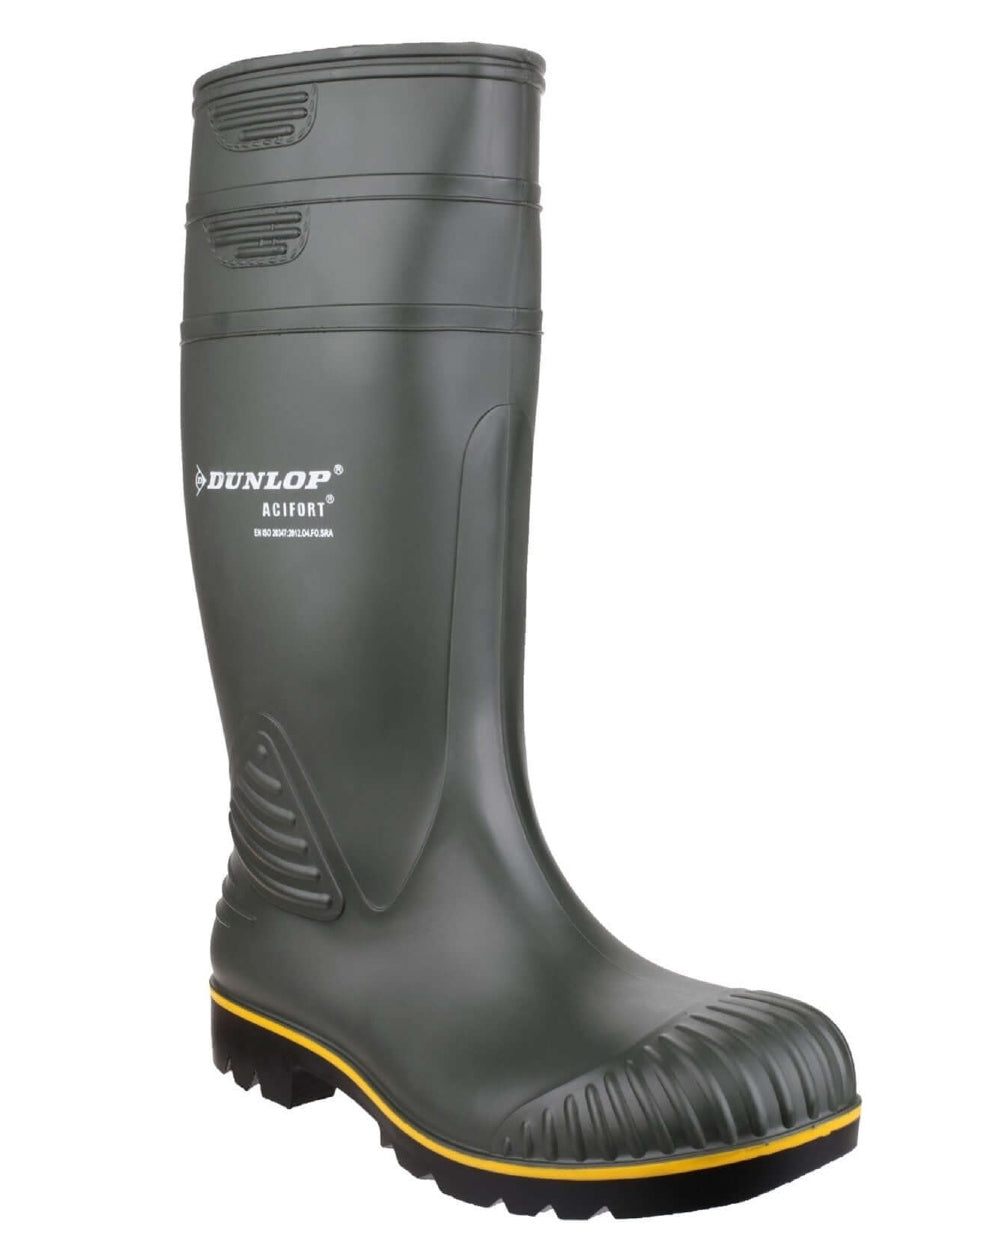 Green coloured Dunlop Acifort Heavy Duty Non Safety Wellingtons on white background 